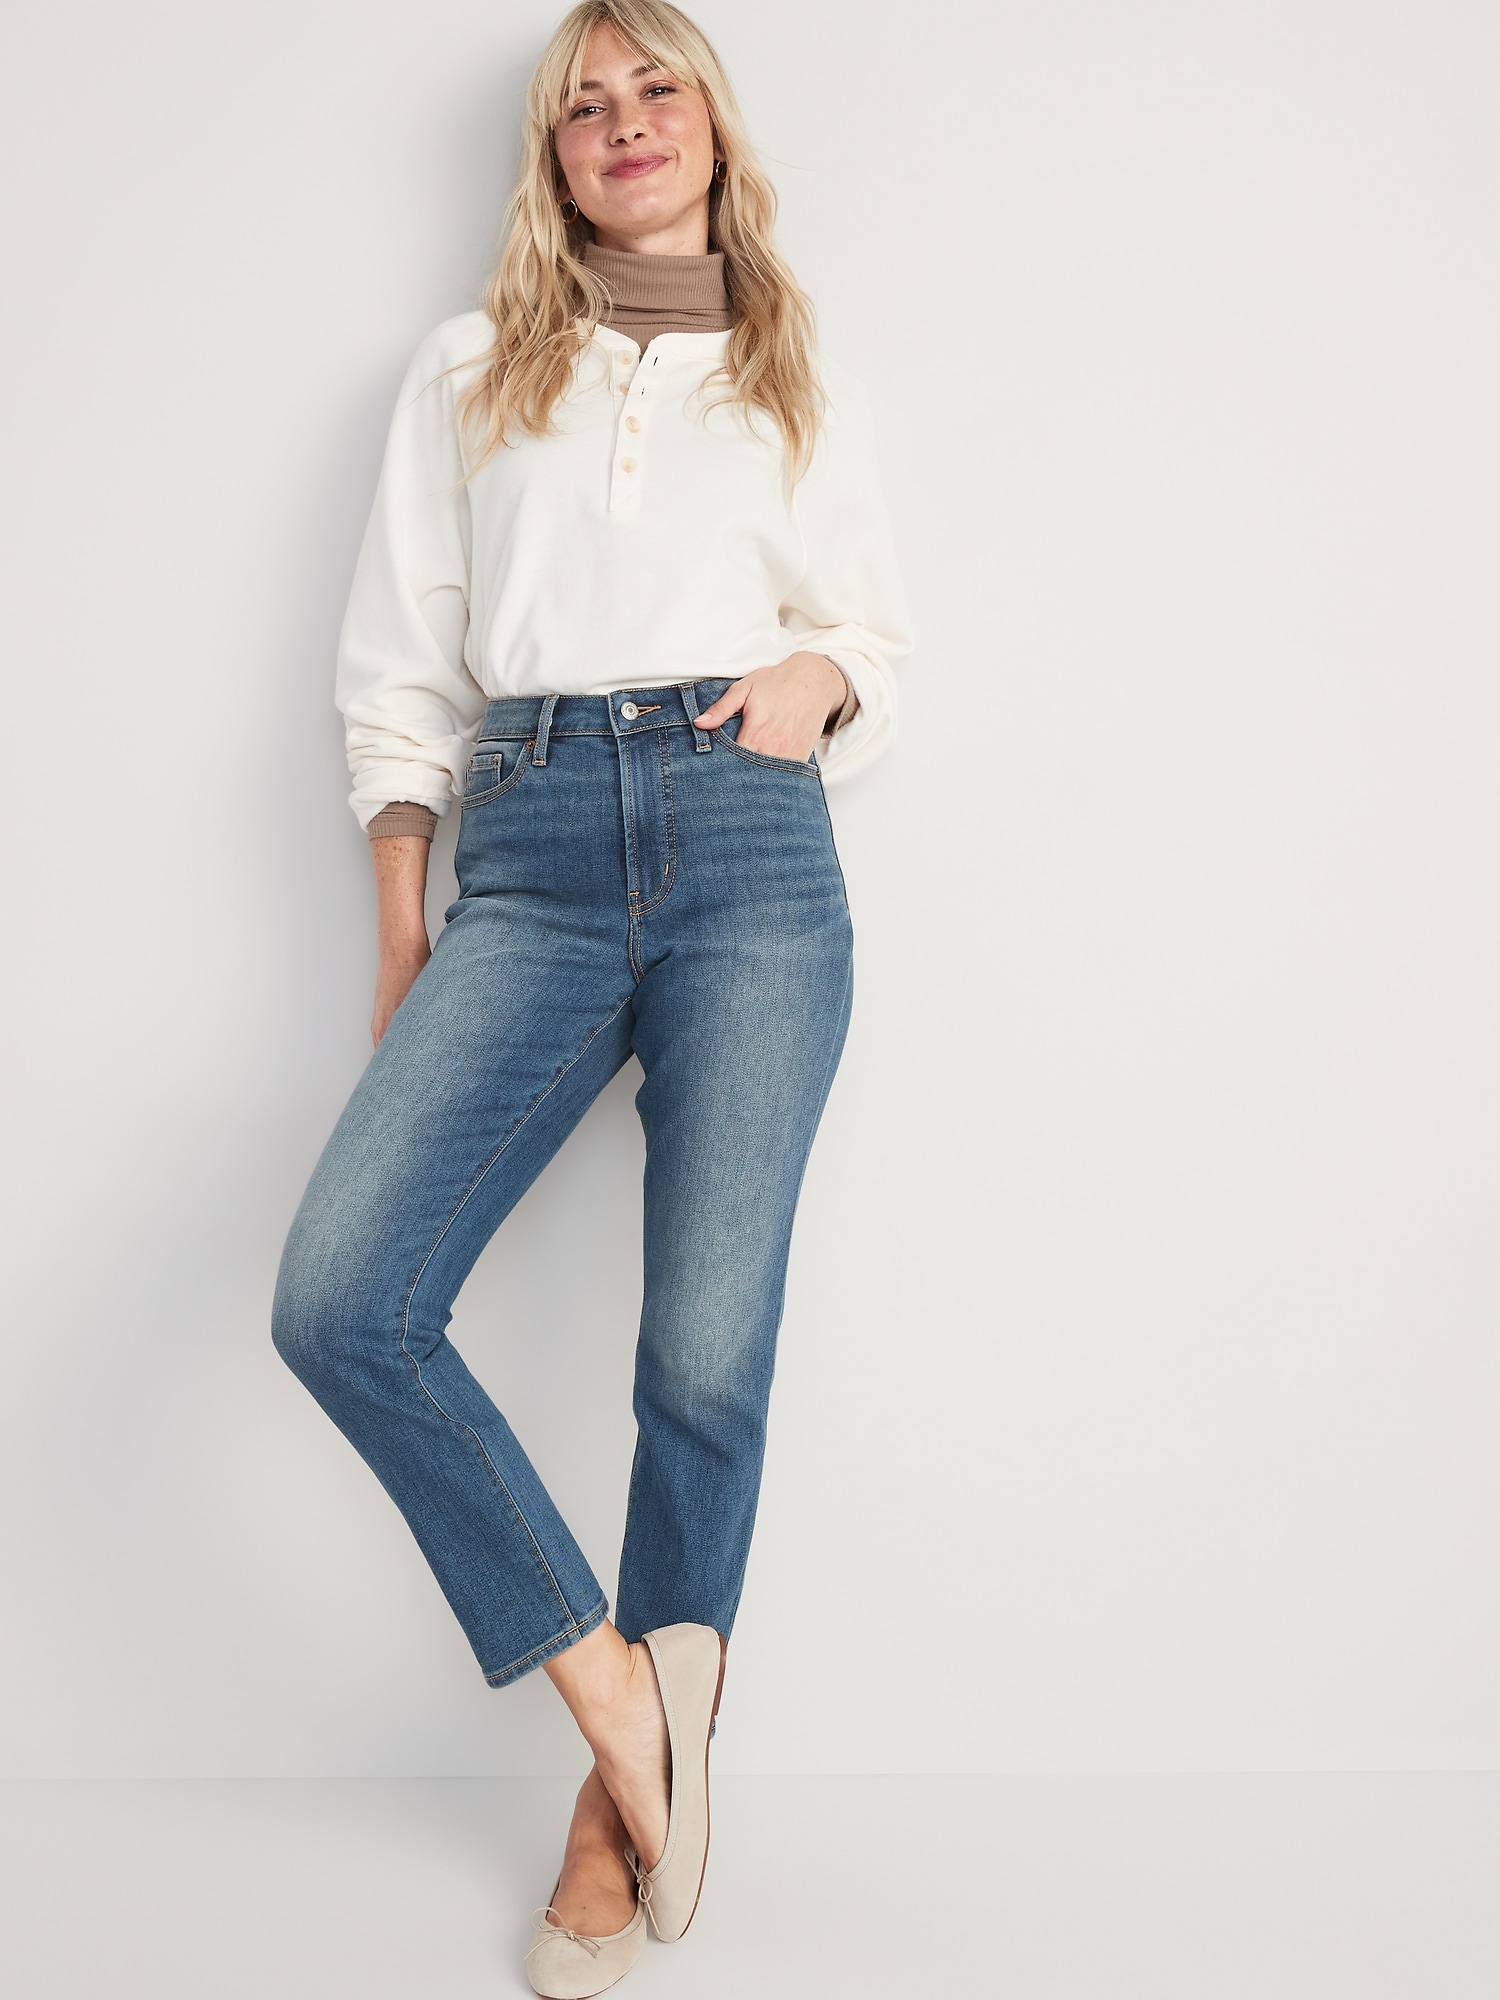 High-Waisted OG Straight Medium-Wash Built-In Warm Ankle Jeans for ...